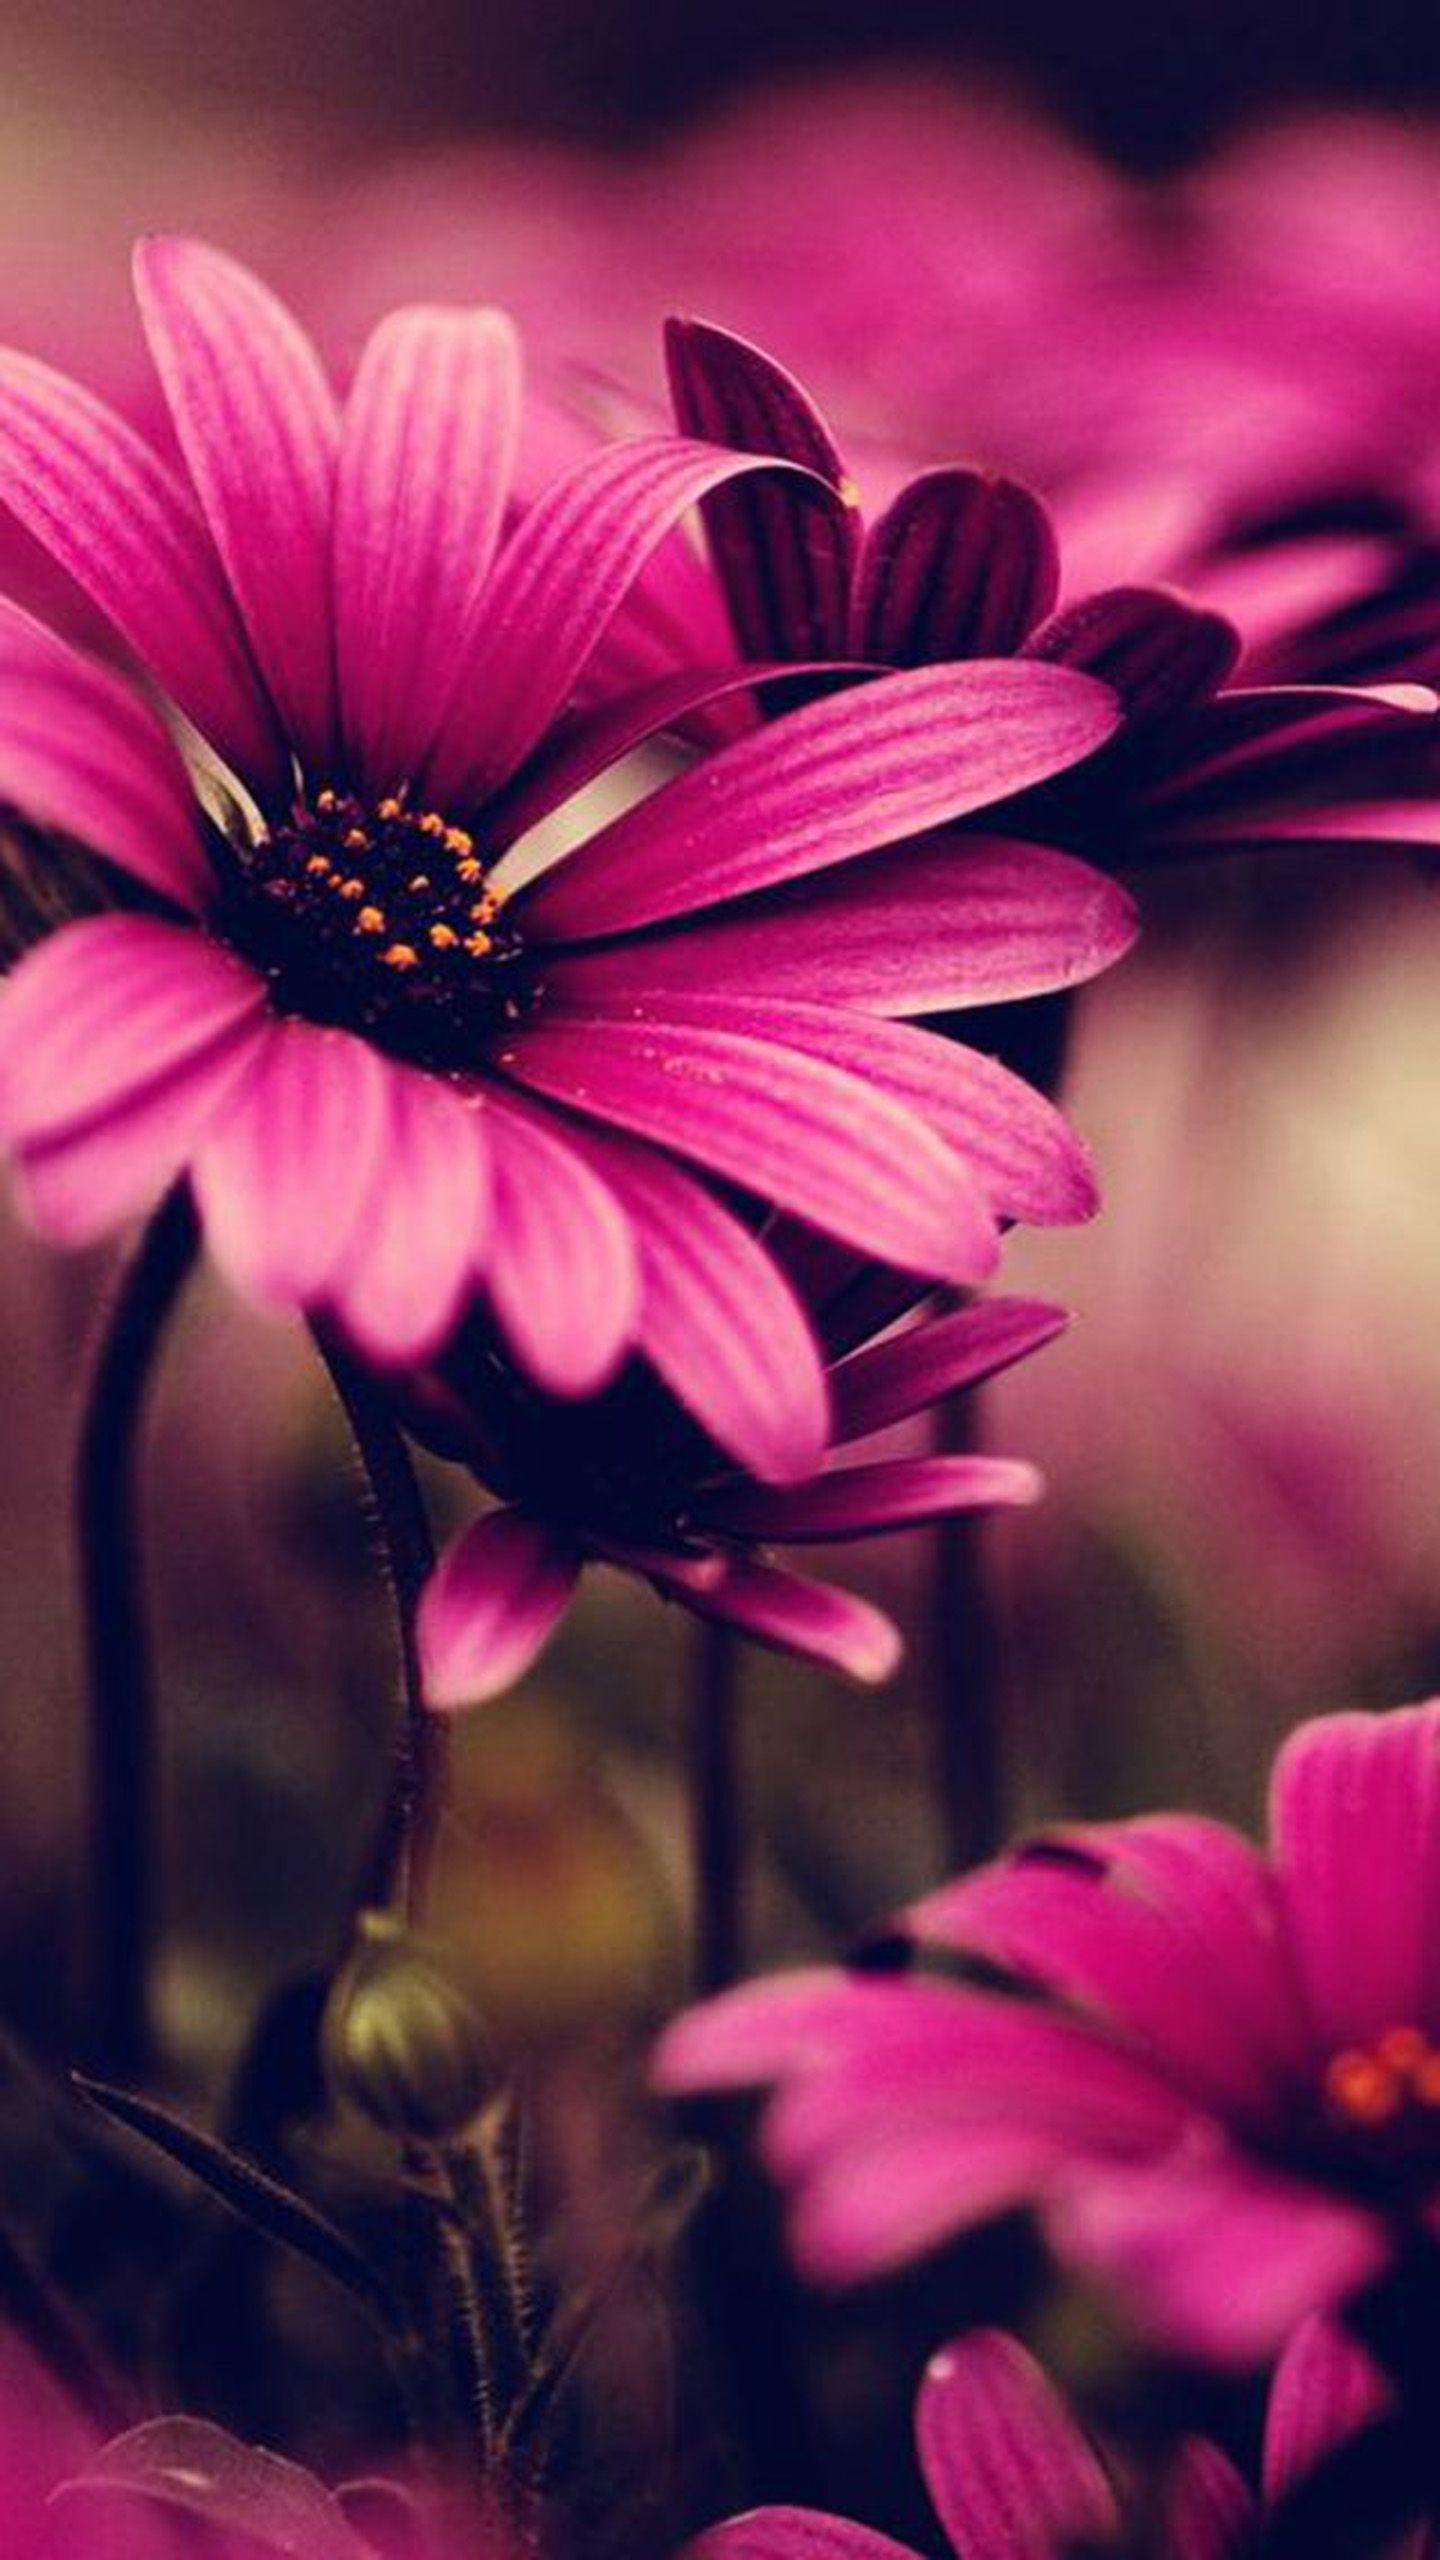 Wallpaper Note 4 Quad 1440 2560 Flowers Pink x 2560